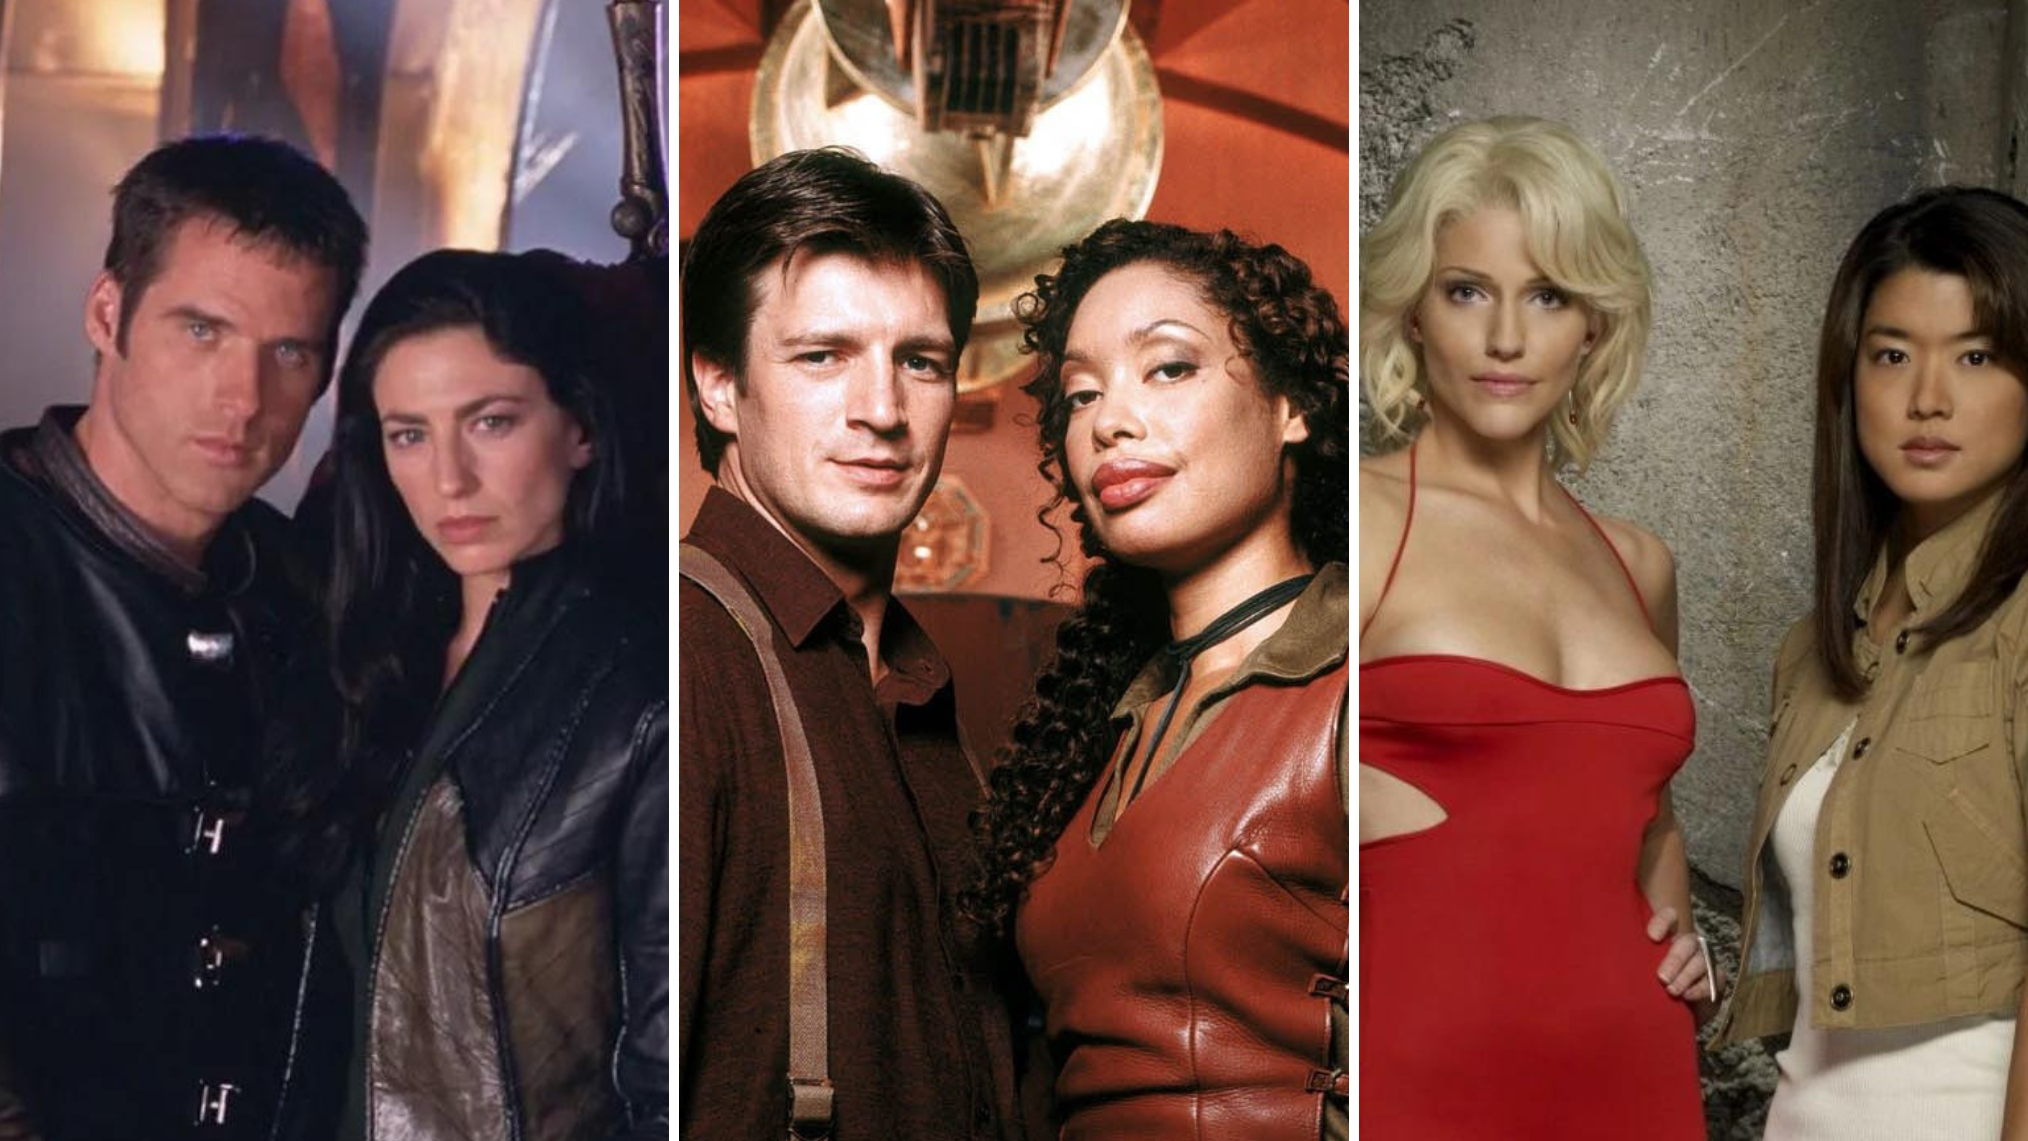 Farscape, Firefly and Battlestar Galactica collage